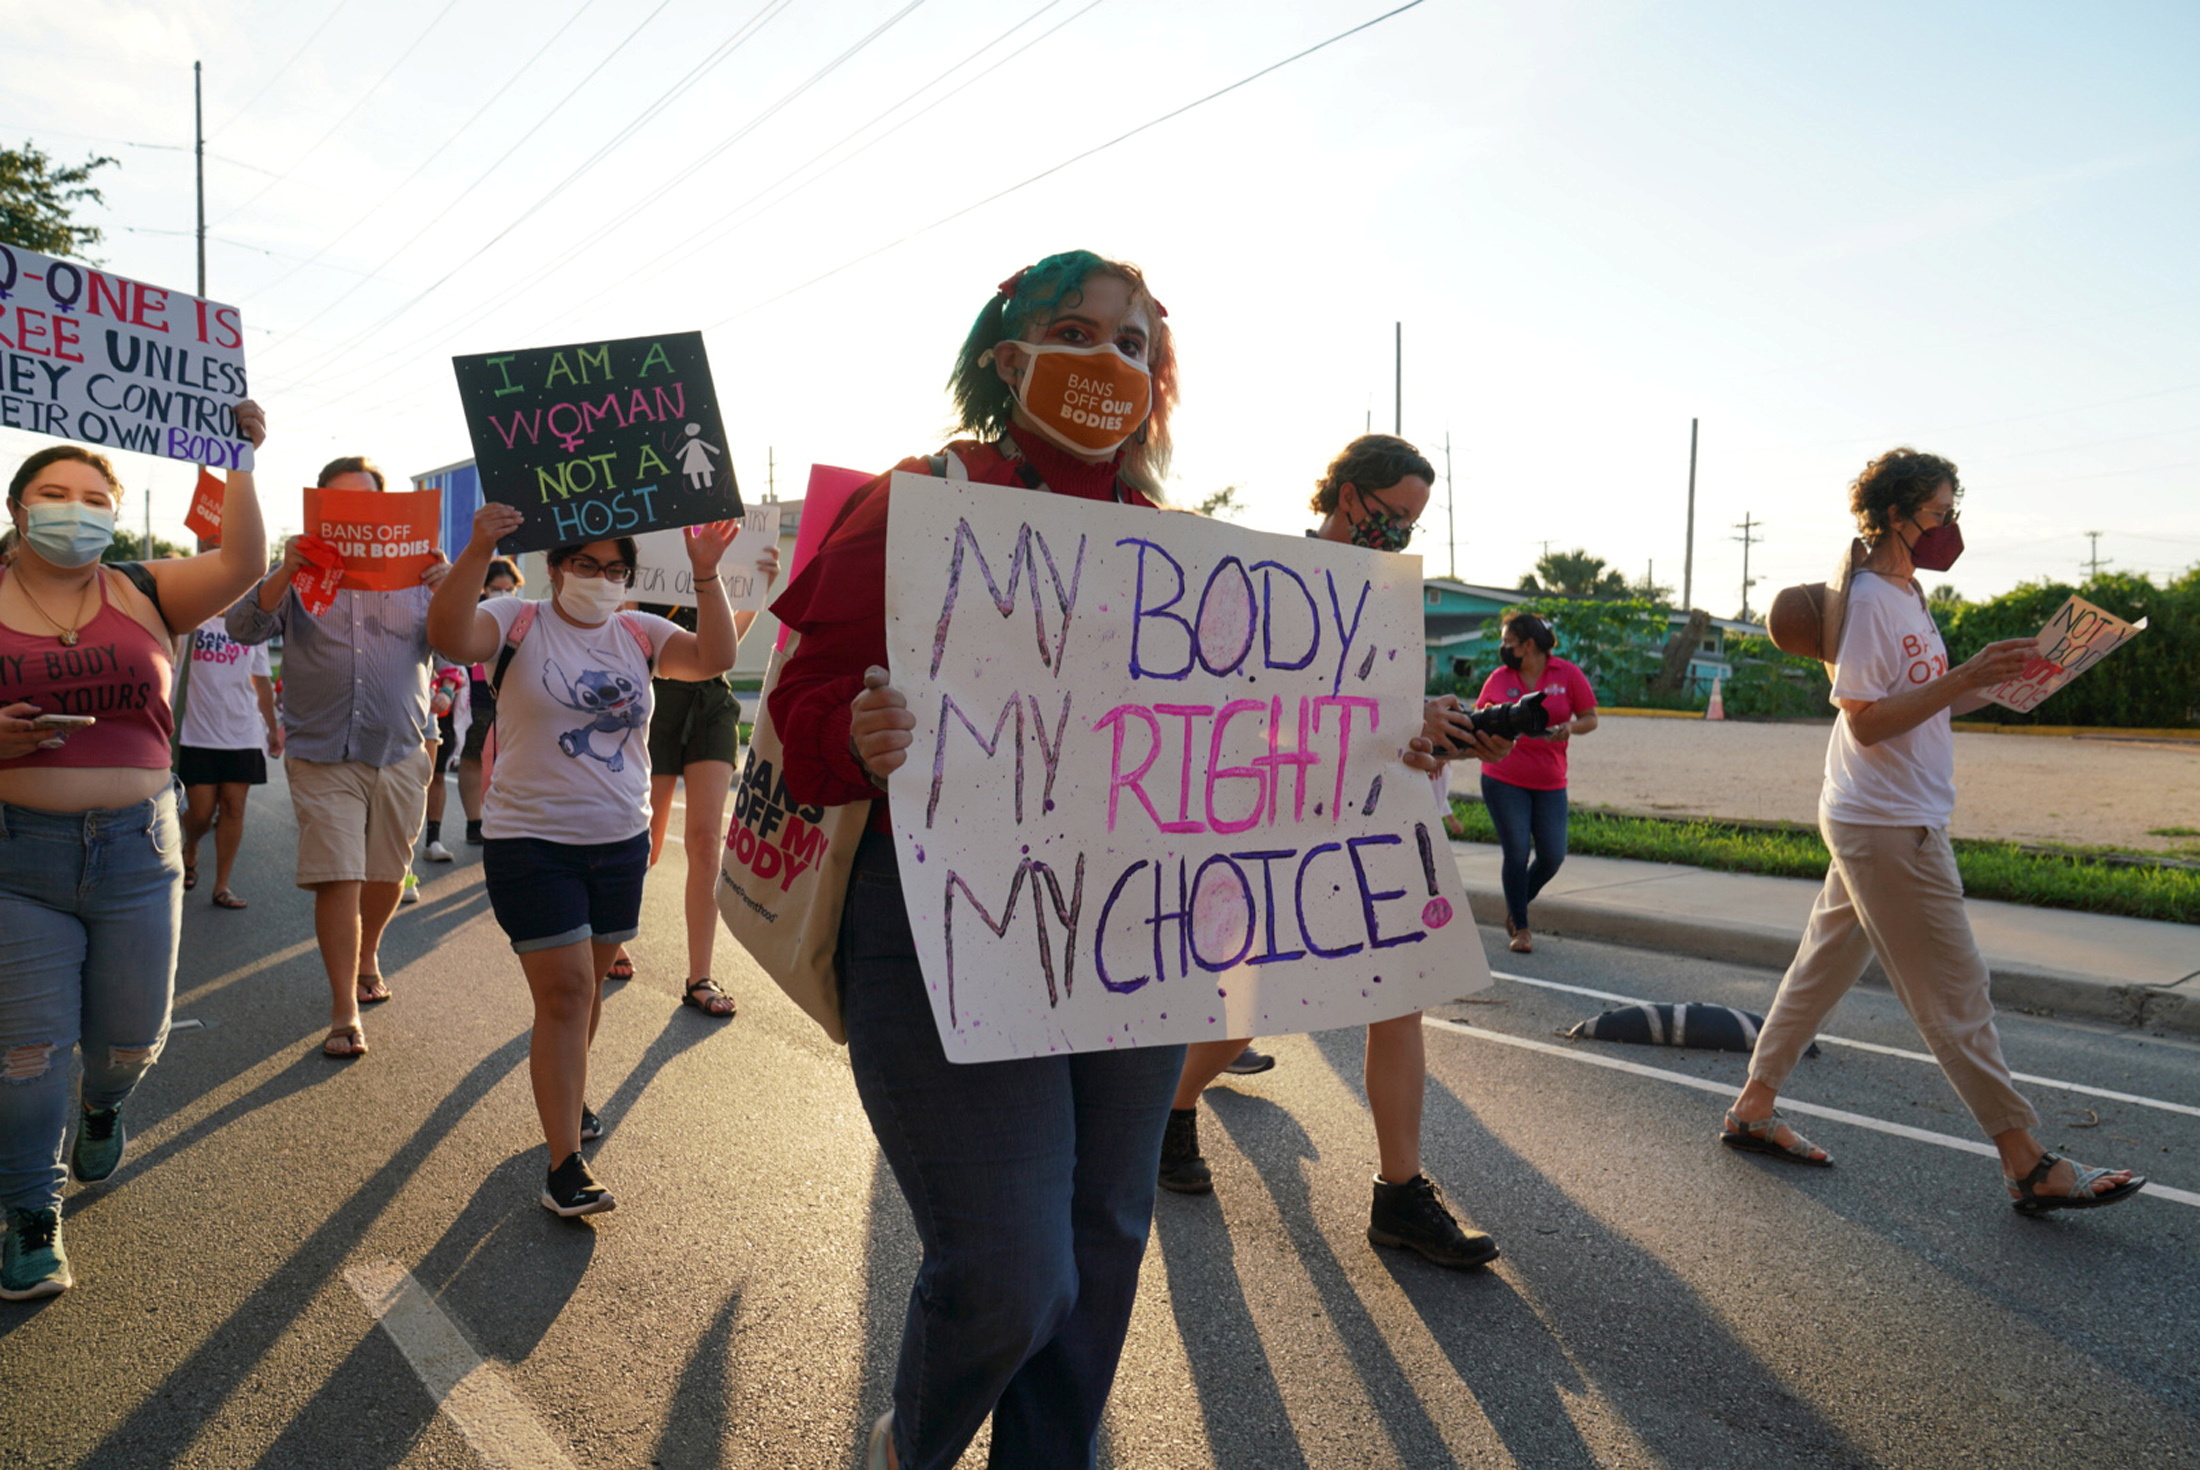 PHOTO: Supporters of reproductive choice take part in the nationwide Women's March, held after Texas rolled out a near-total ban on abortion procedures and access to abortion-inducing medications, in Brownsville, Texas, Oct. 2, 2021.